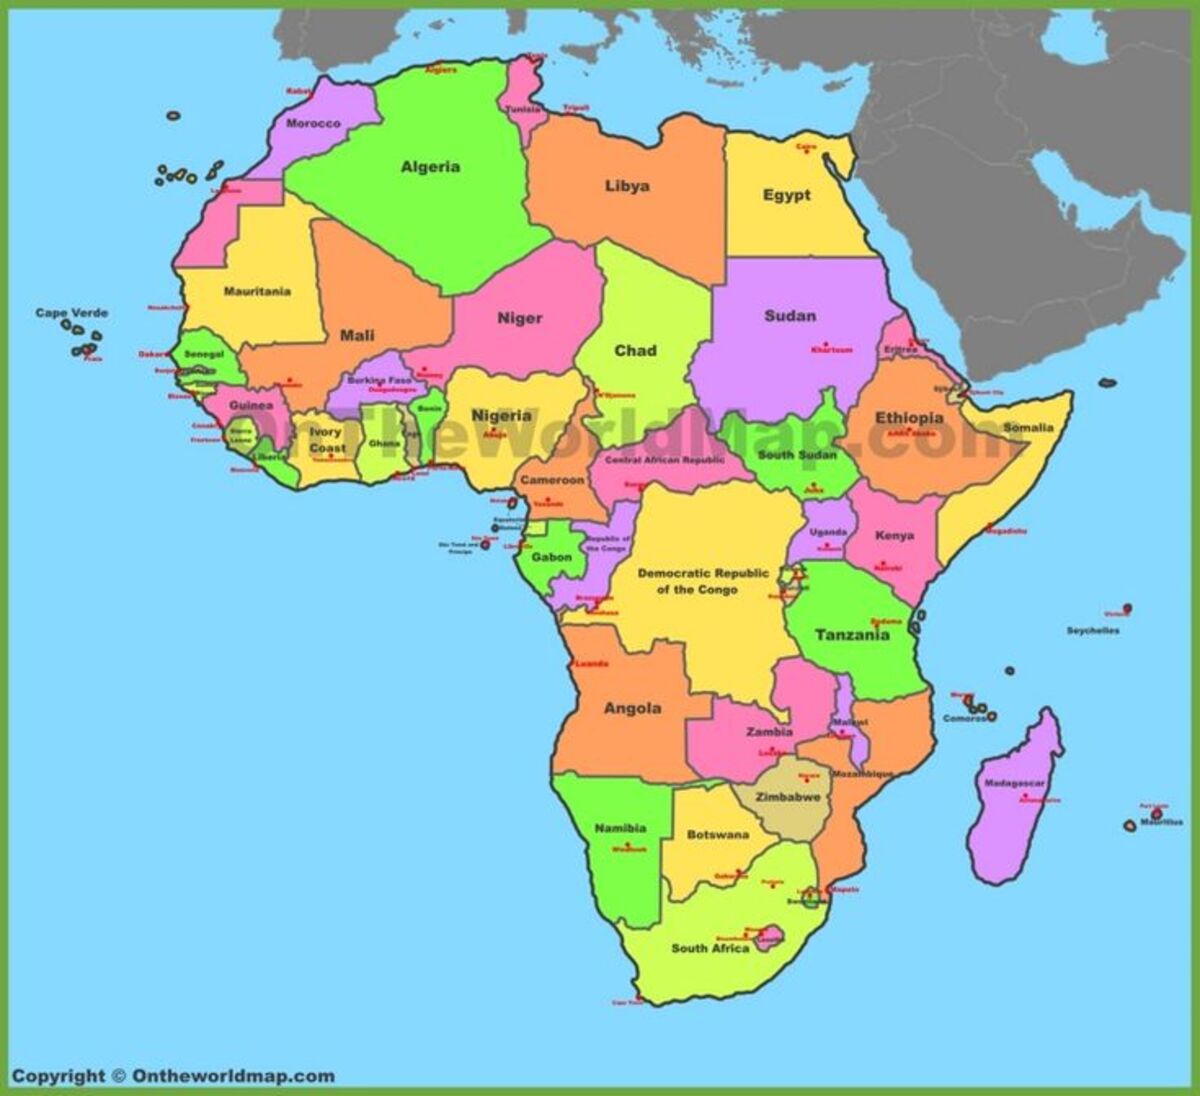 Africa's map